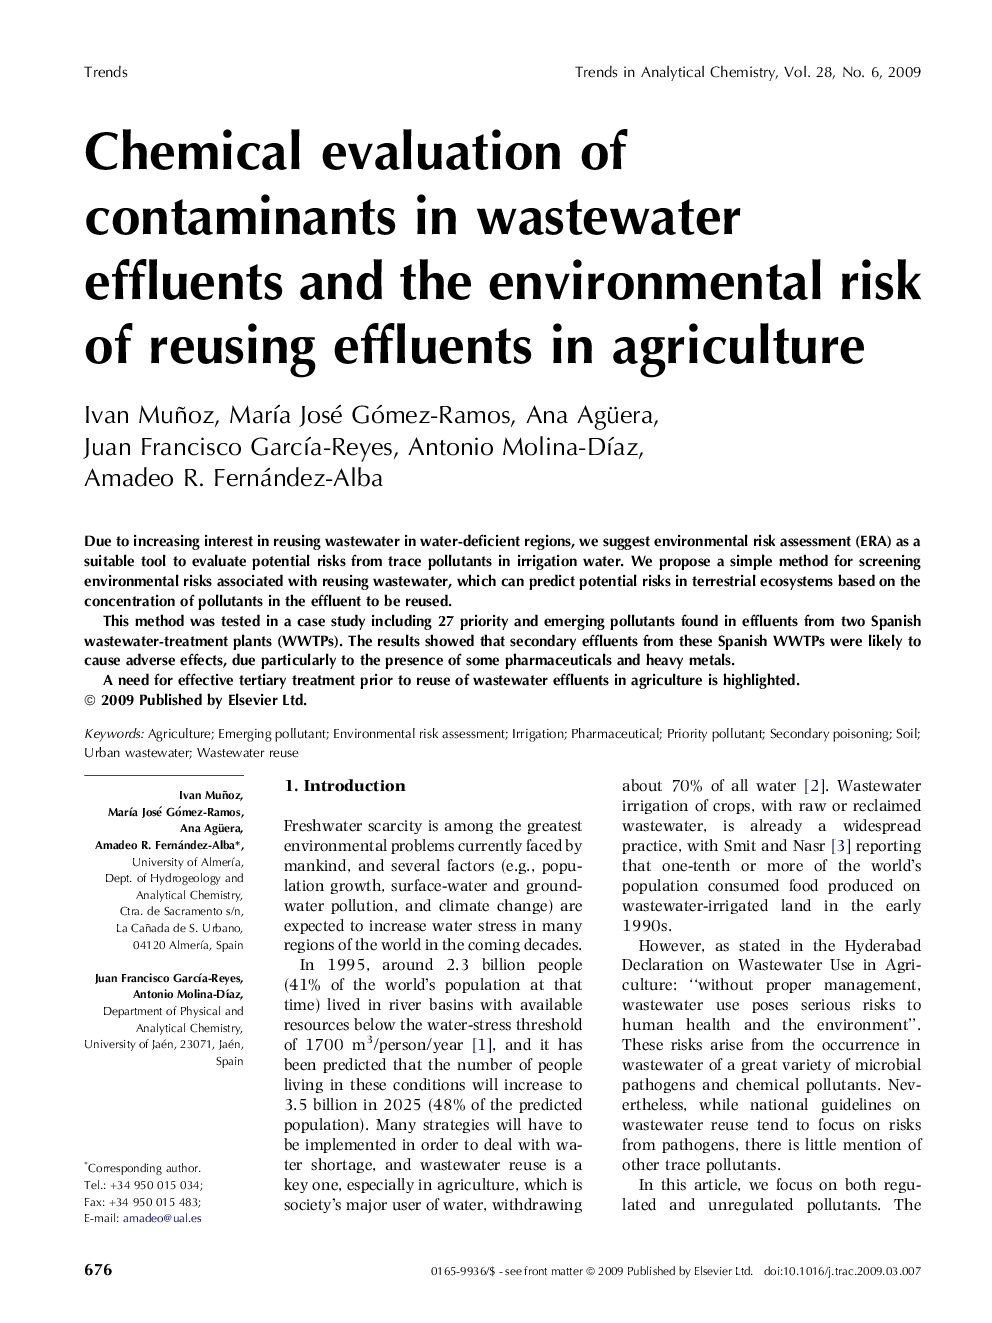 Chemical evaluation of contaminants in wastewater effluents and the environmental risk of reusing effluents in agriculture